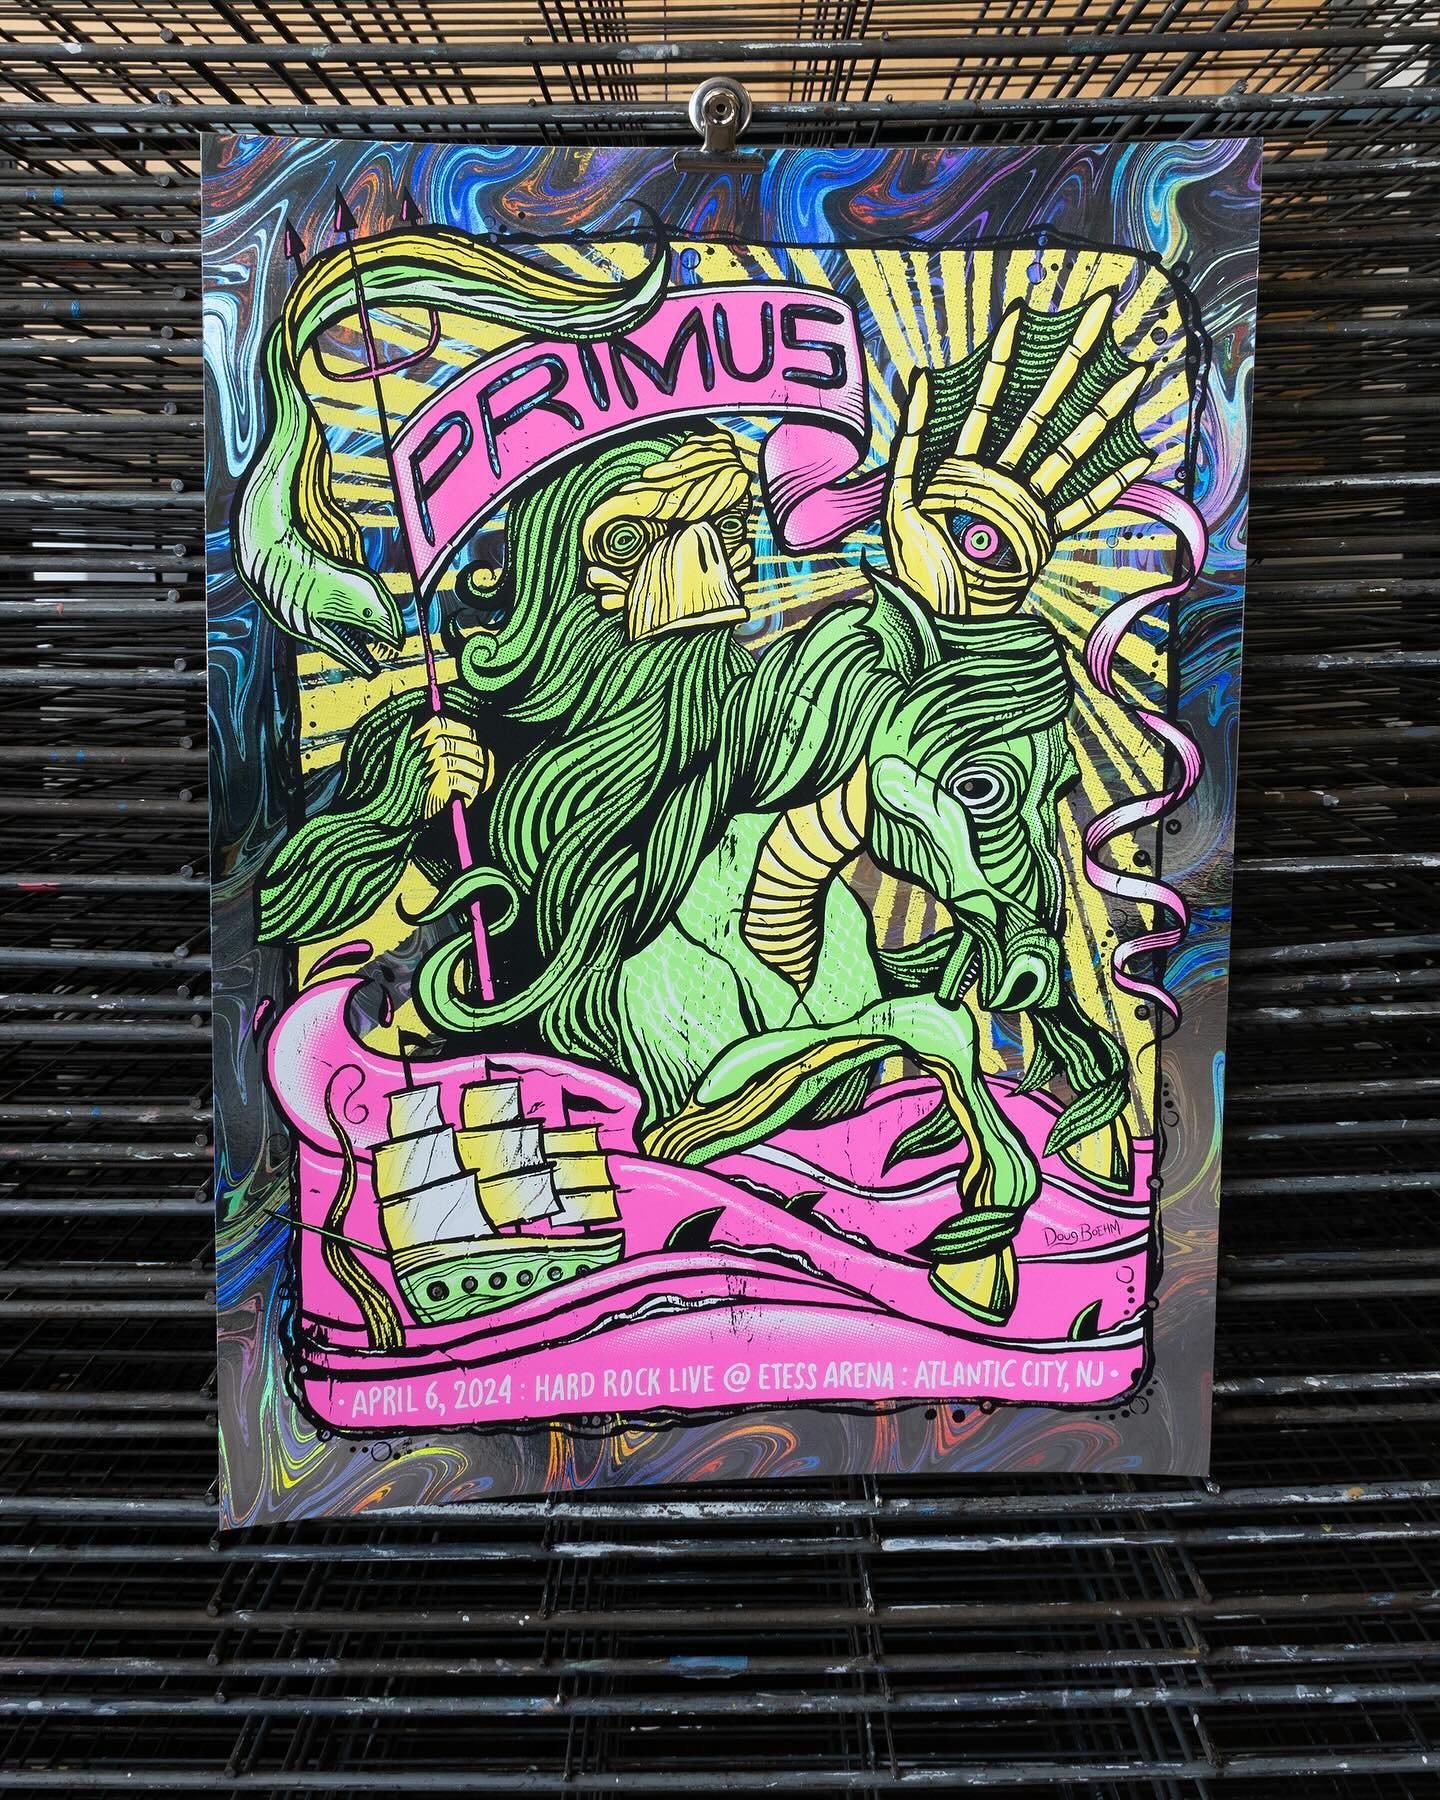 Had the pleasure of having these awesome @primusville posters on press earlier this year. Featuring some killer art from @dougboehmart 

These were four &amp; five layer screen prints printed with multiple variations of paper and ink colors. Includin